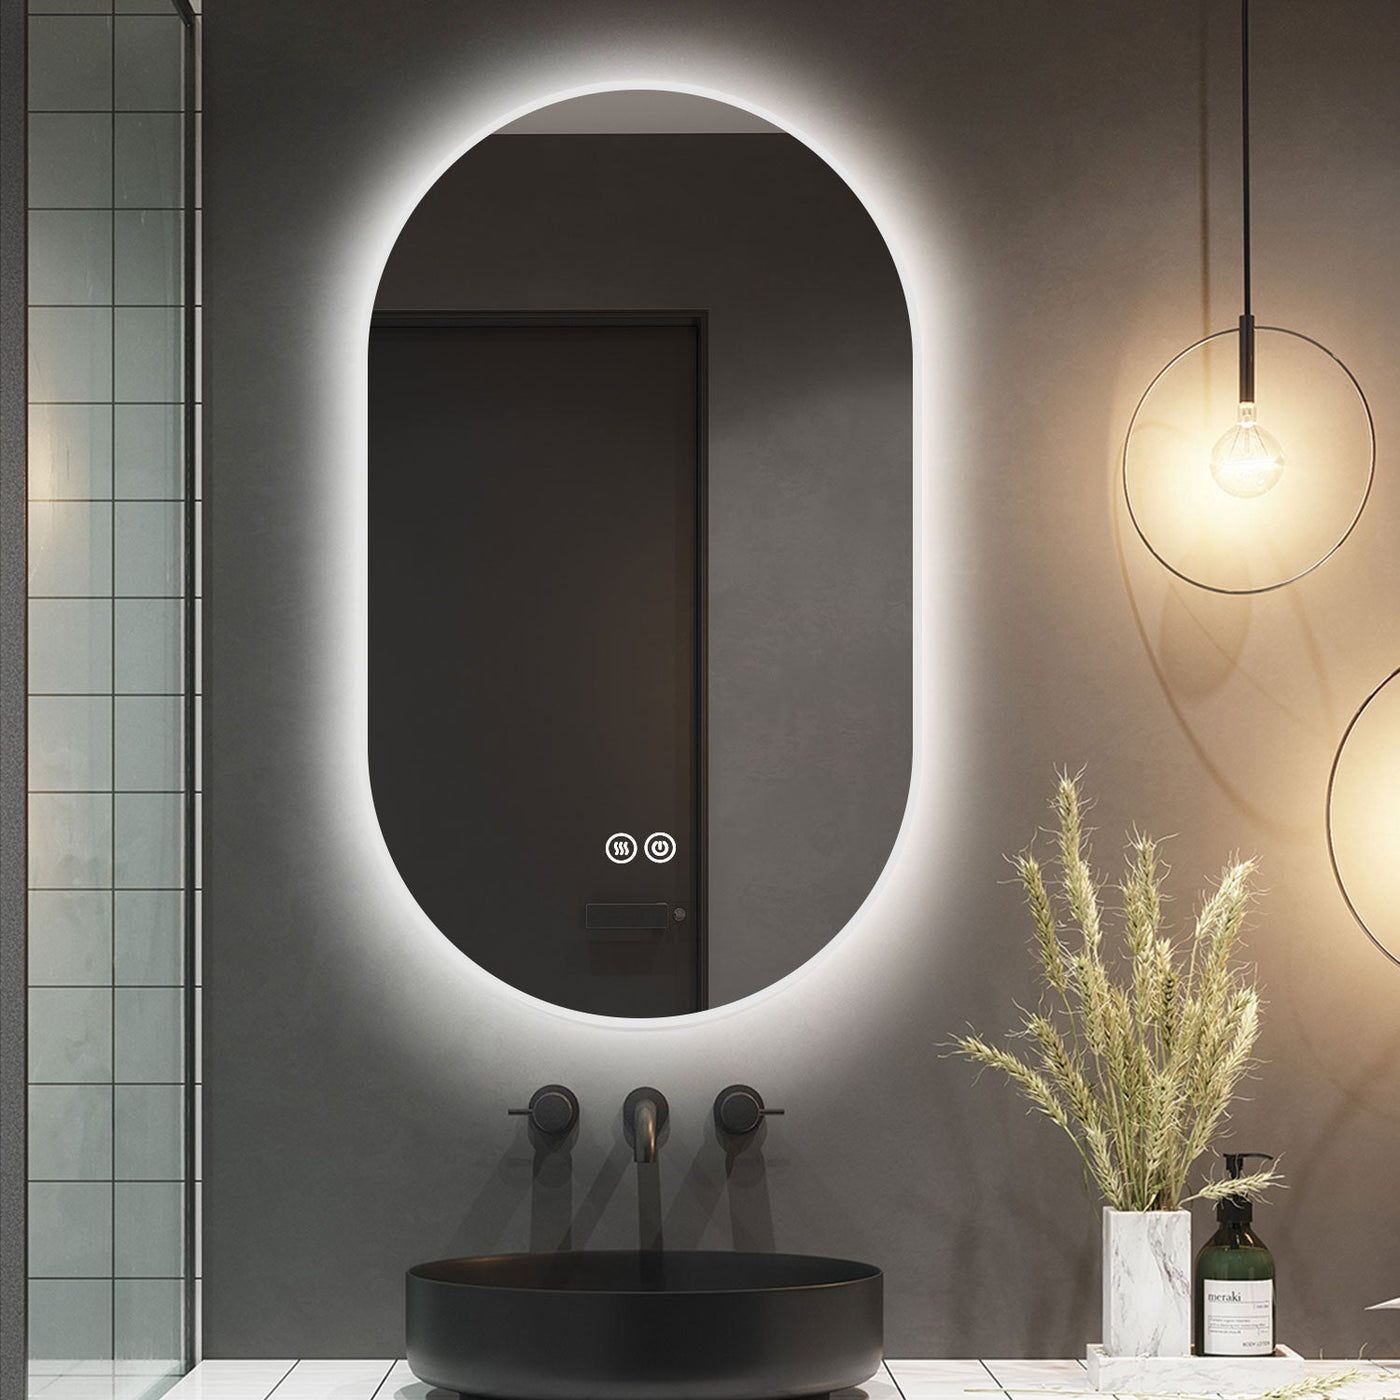 Framed Oval LED Mirror with a Demister, Three Colour Selections, And A Convenient Dimmer